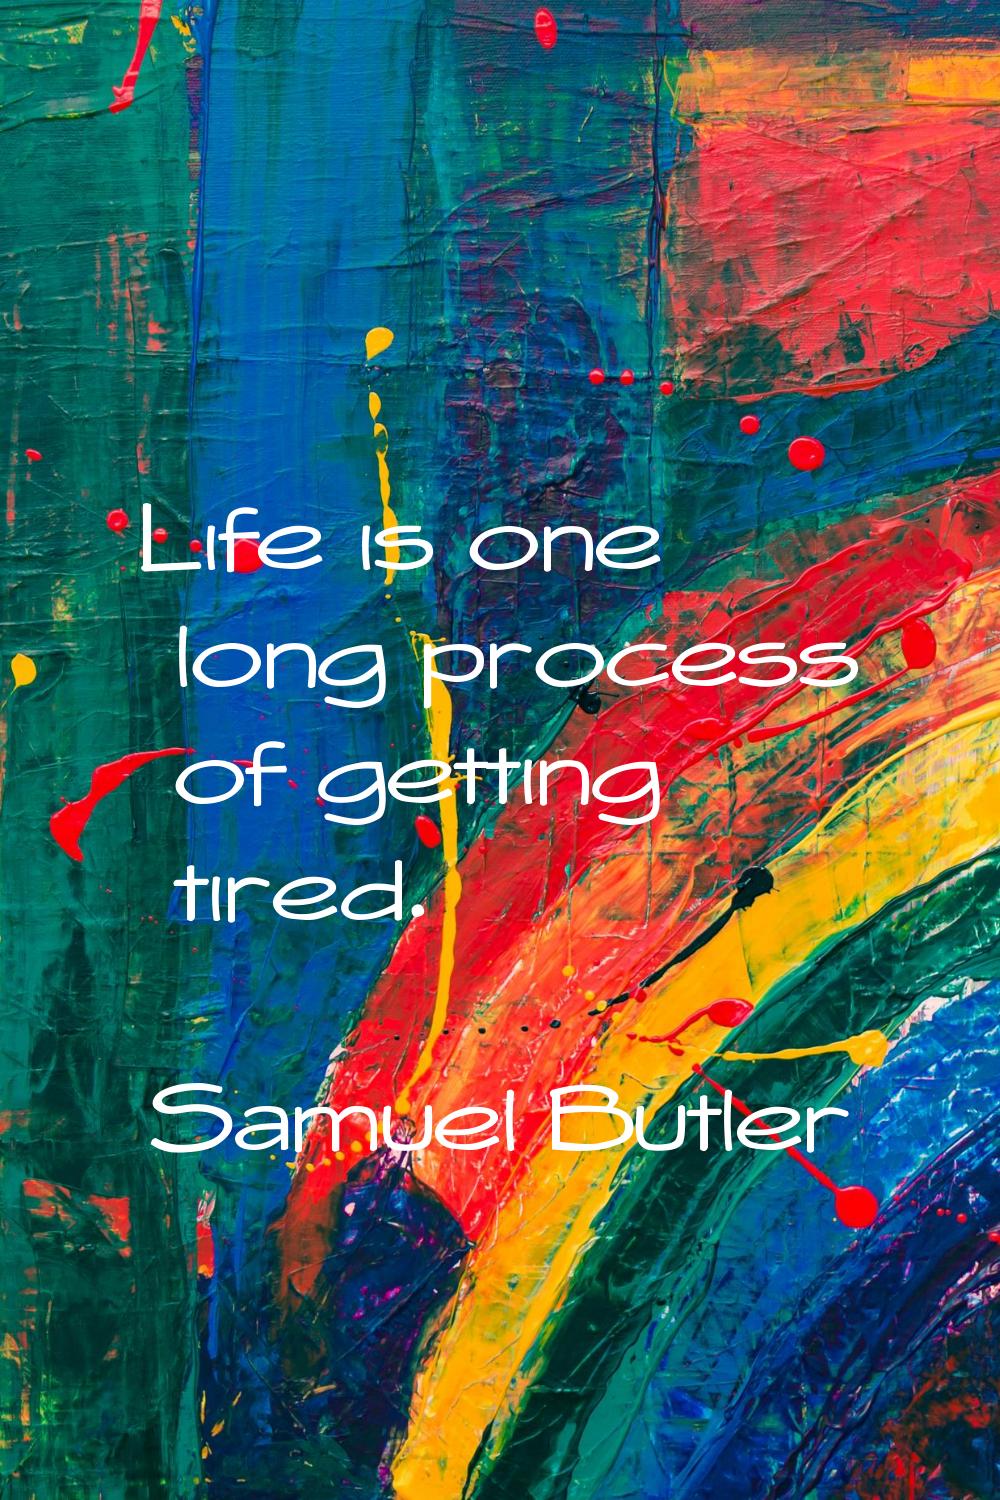 Life is one long process of getting tired.